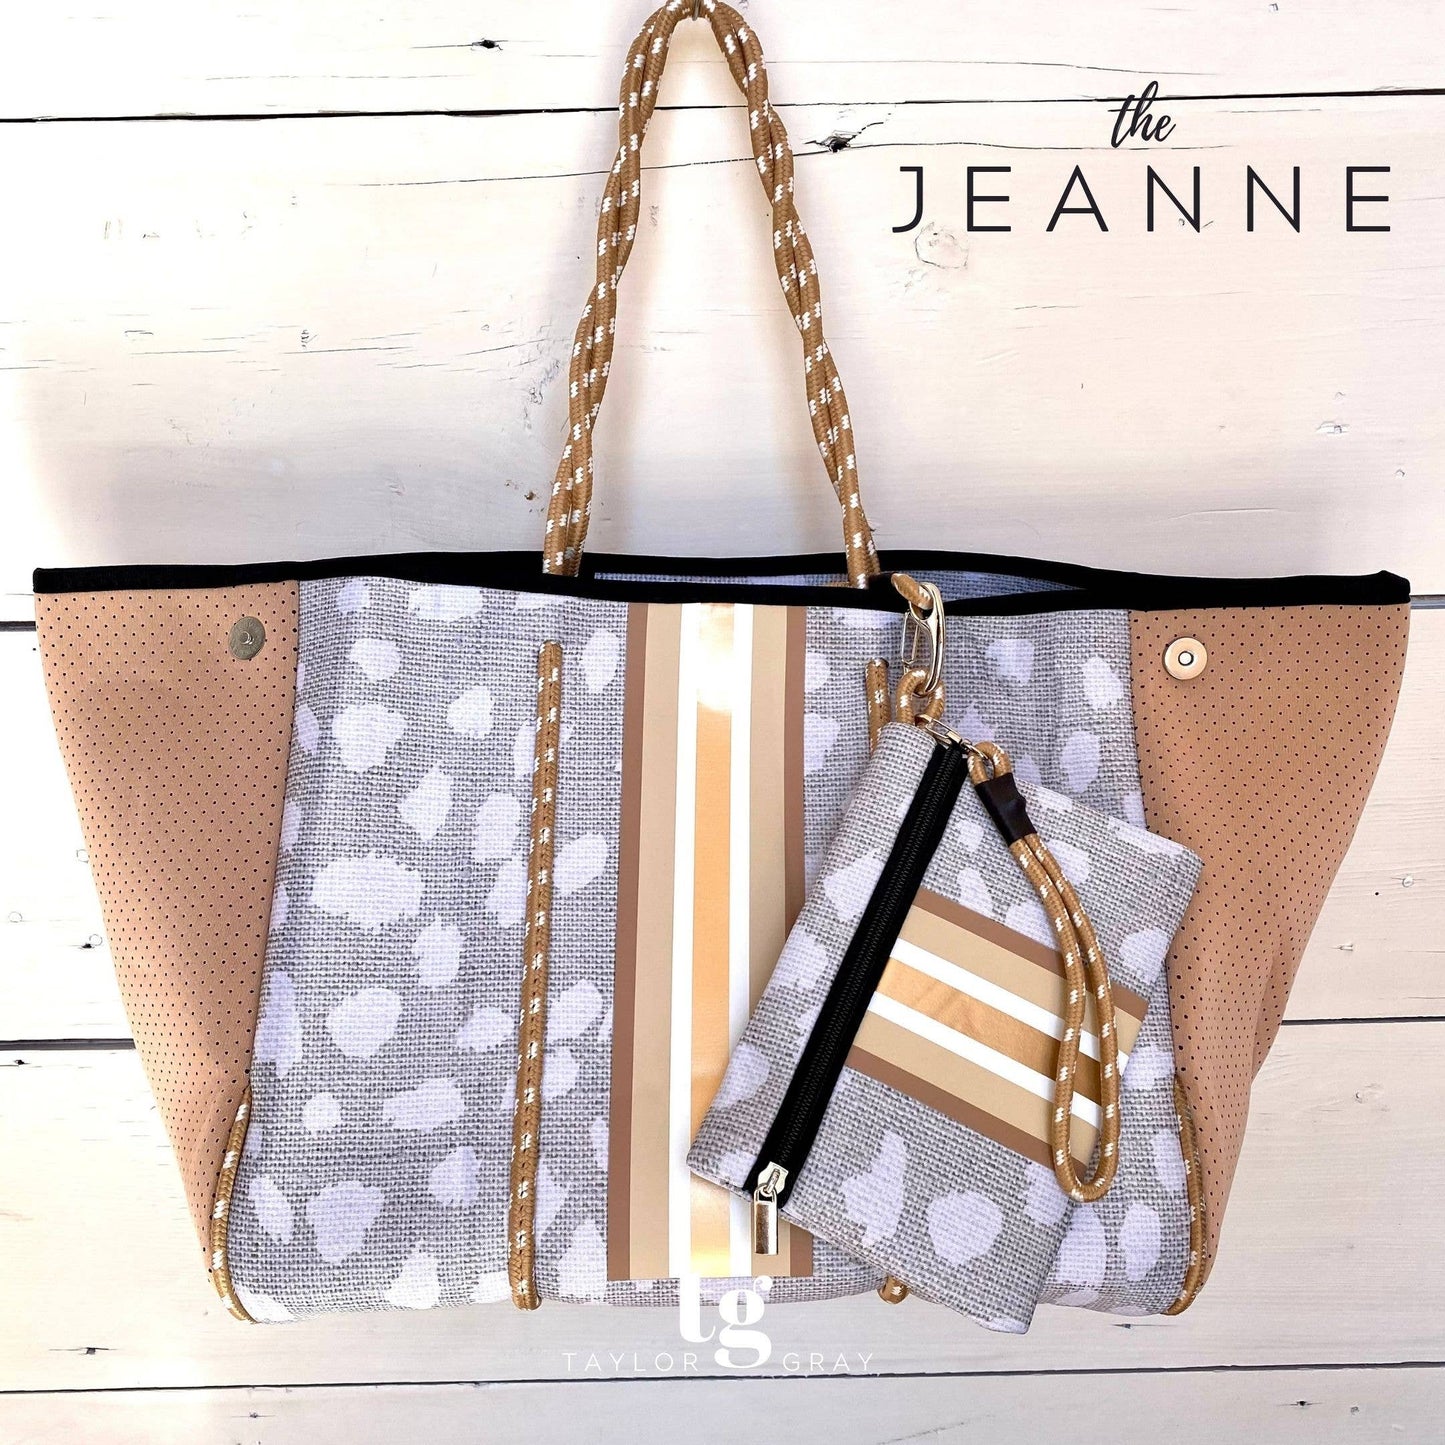 Neoprene Tote - The Jeanne by Taylor Gray